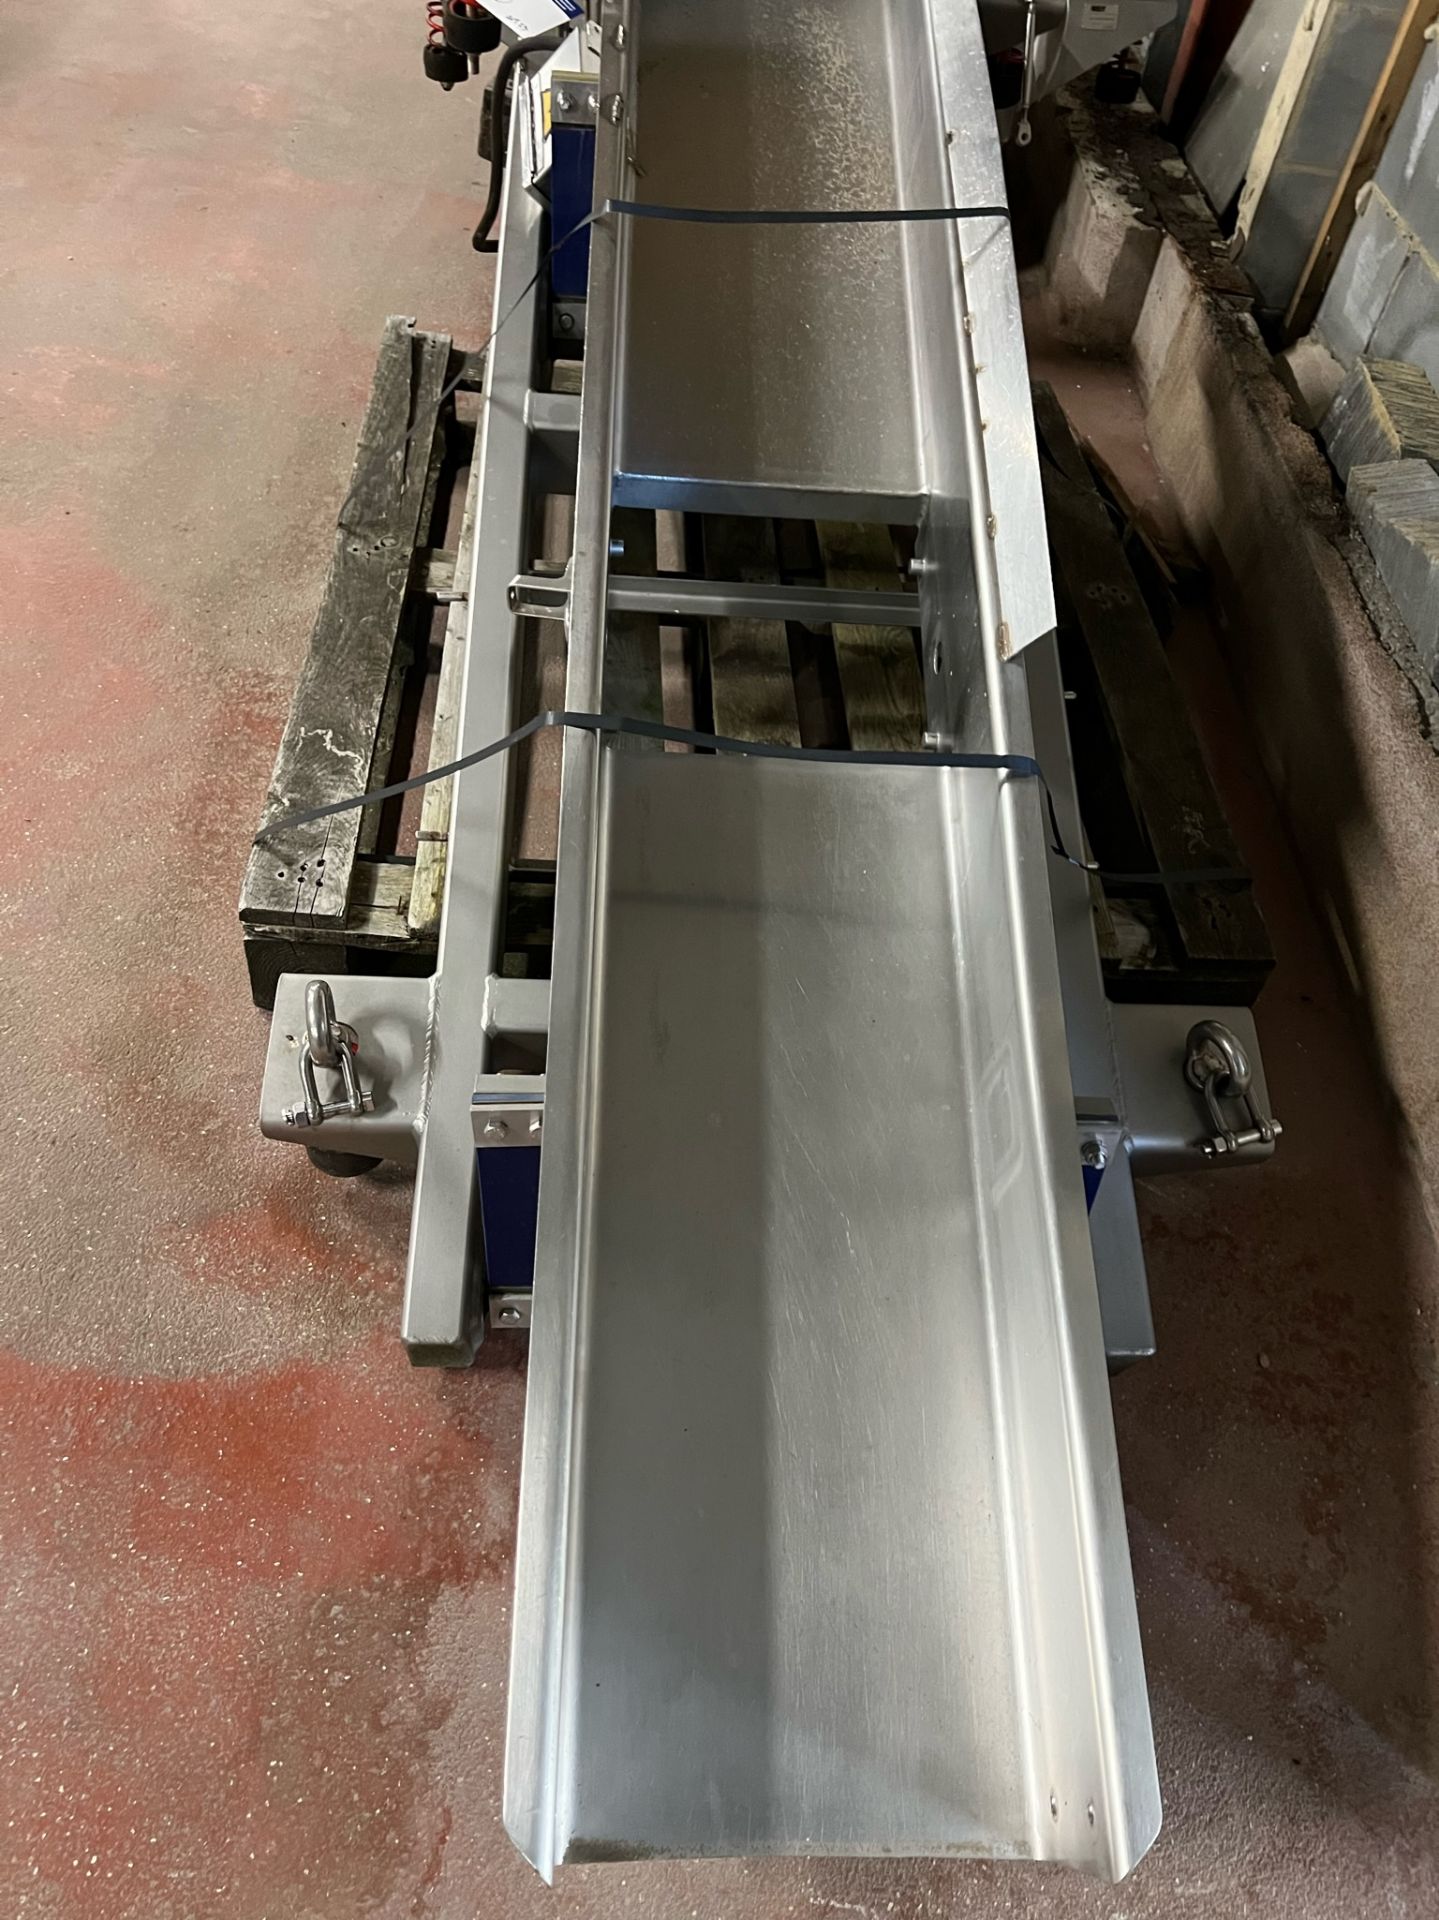 Isoflo Vibratory Conveyor Shaker, with fluted infeed, approx. 30cm wide x 2m long Please read the - Image 2 of 3